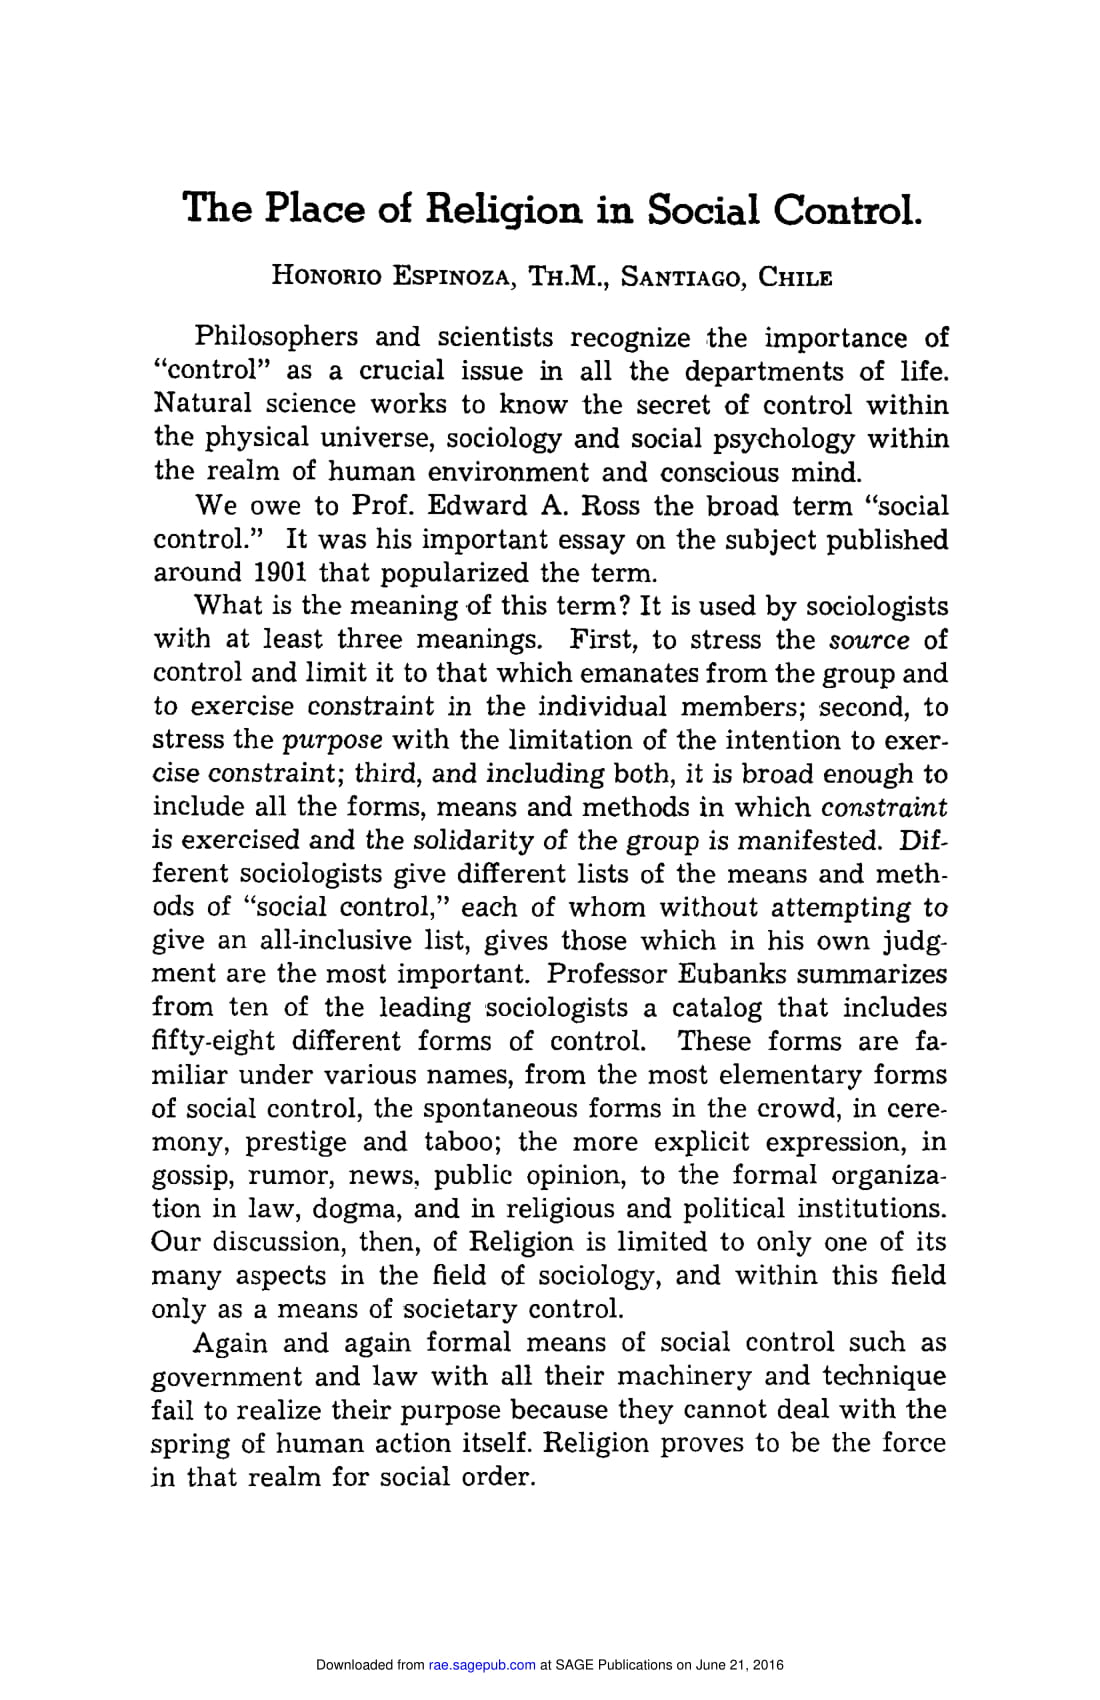 H Espinoza The Place of Religion in Social Control Review and Expositor July 1940-1.jpg